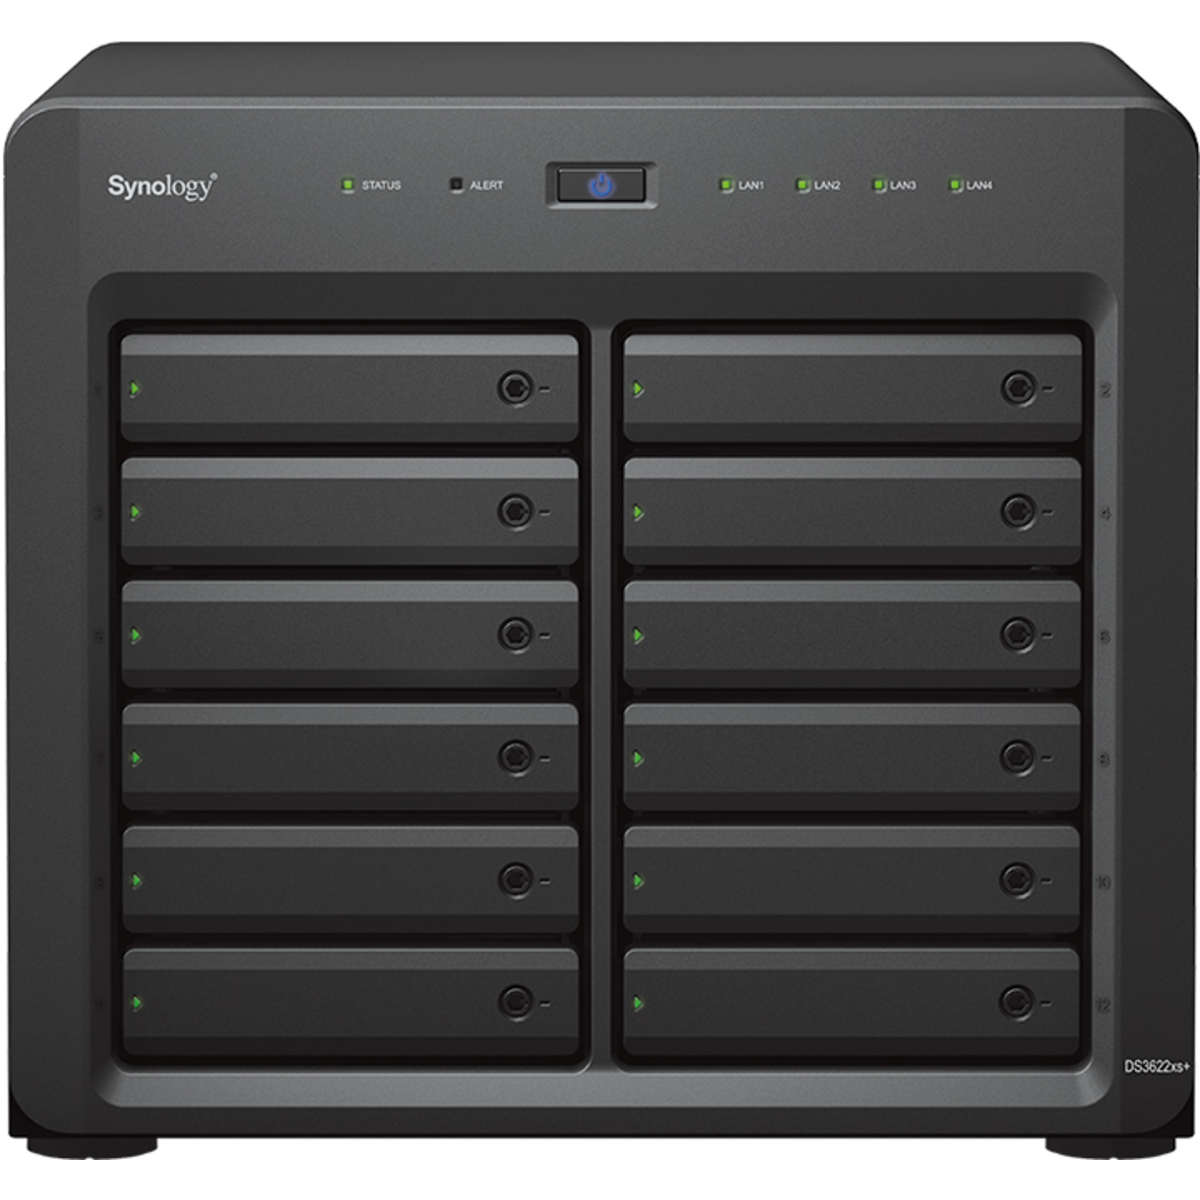 Synology DiskStation DS3622xs+ 144tb 12-Bay Desktop Multimedia / Power User / Business NAS - Network Attached Storage Device 8x18tb Western Digital Gold WD181KRYZ 3.5 7200rpm SATA 6Gb/s HDD ENTERPRISE Class Drives Installed - Burn-In Tested DiskStation DS3622xs+